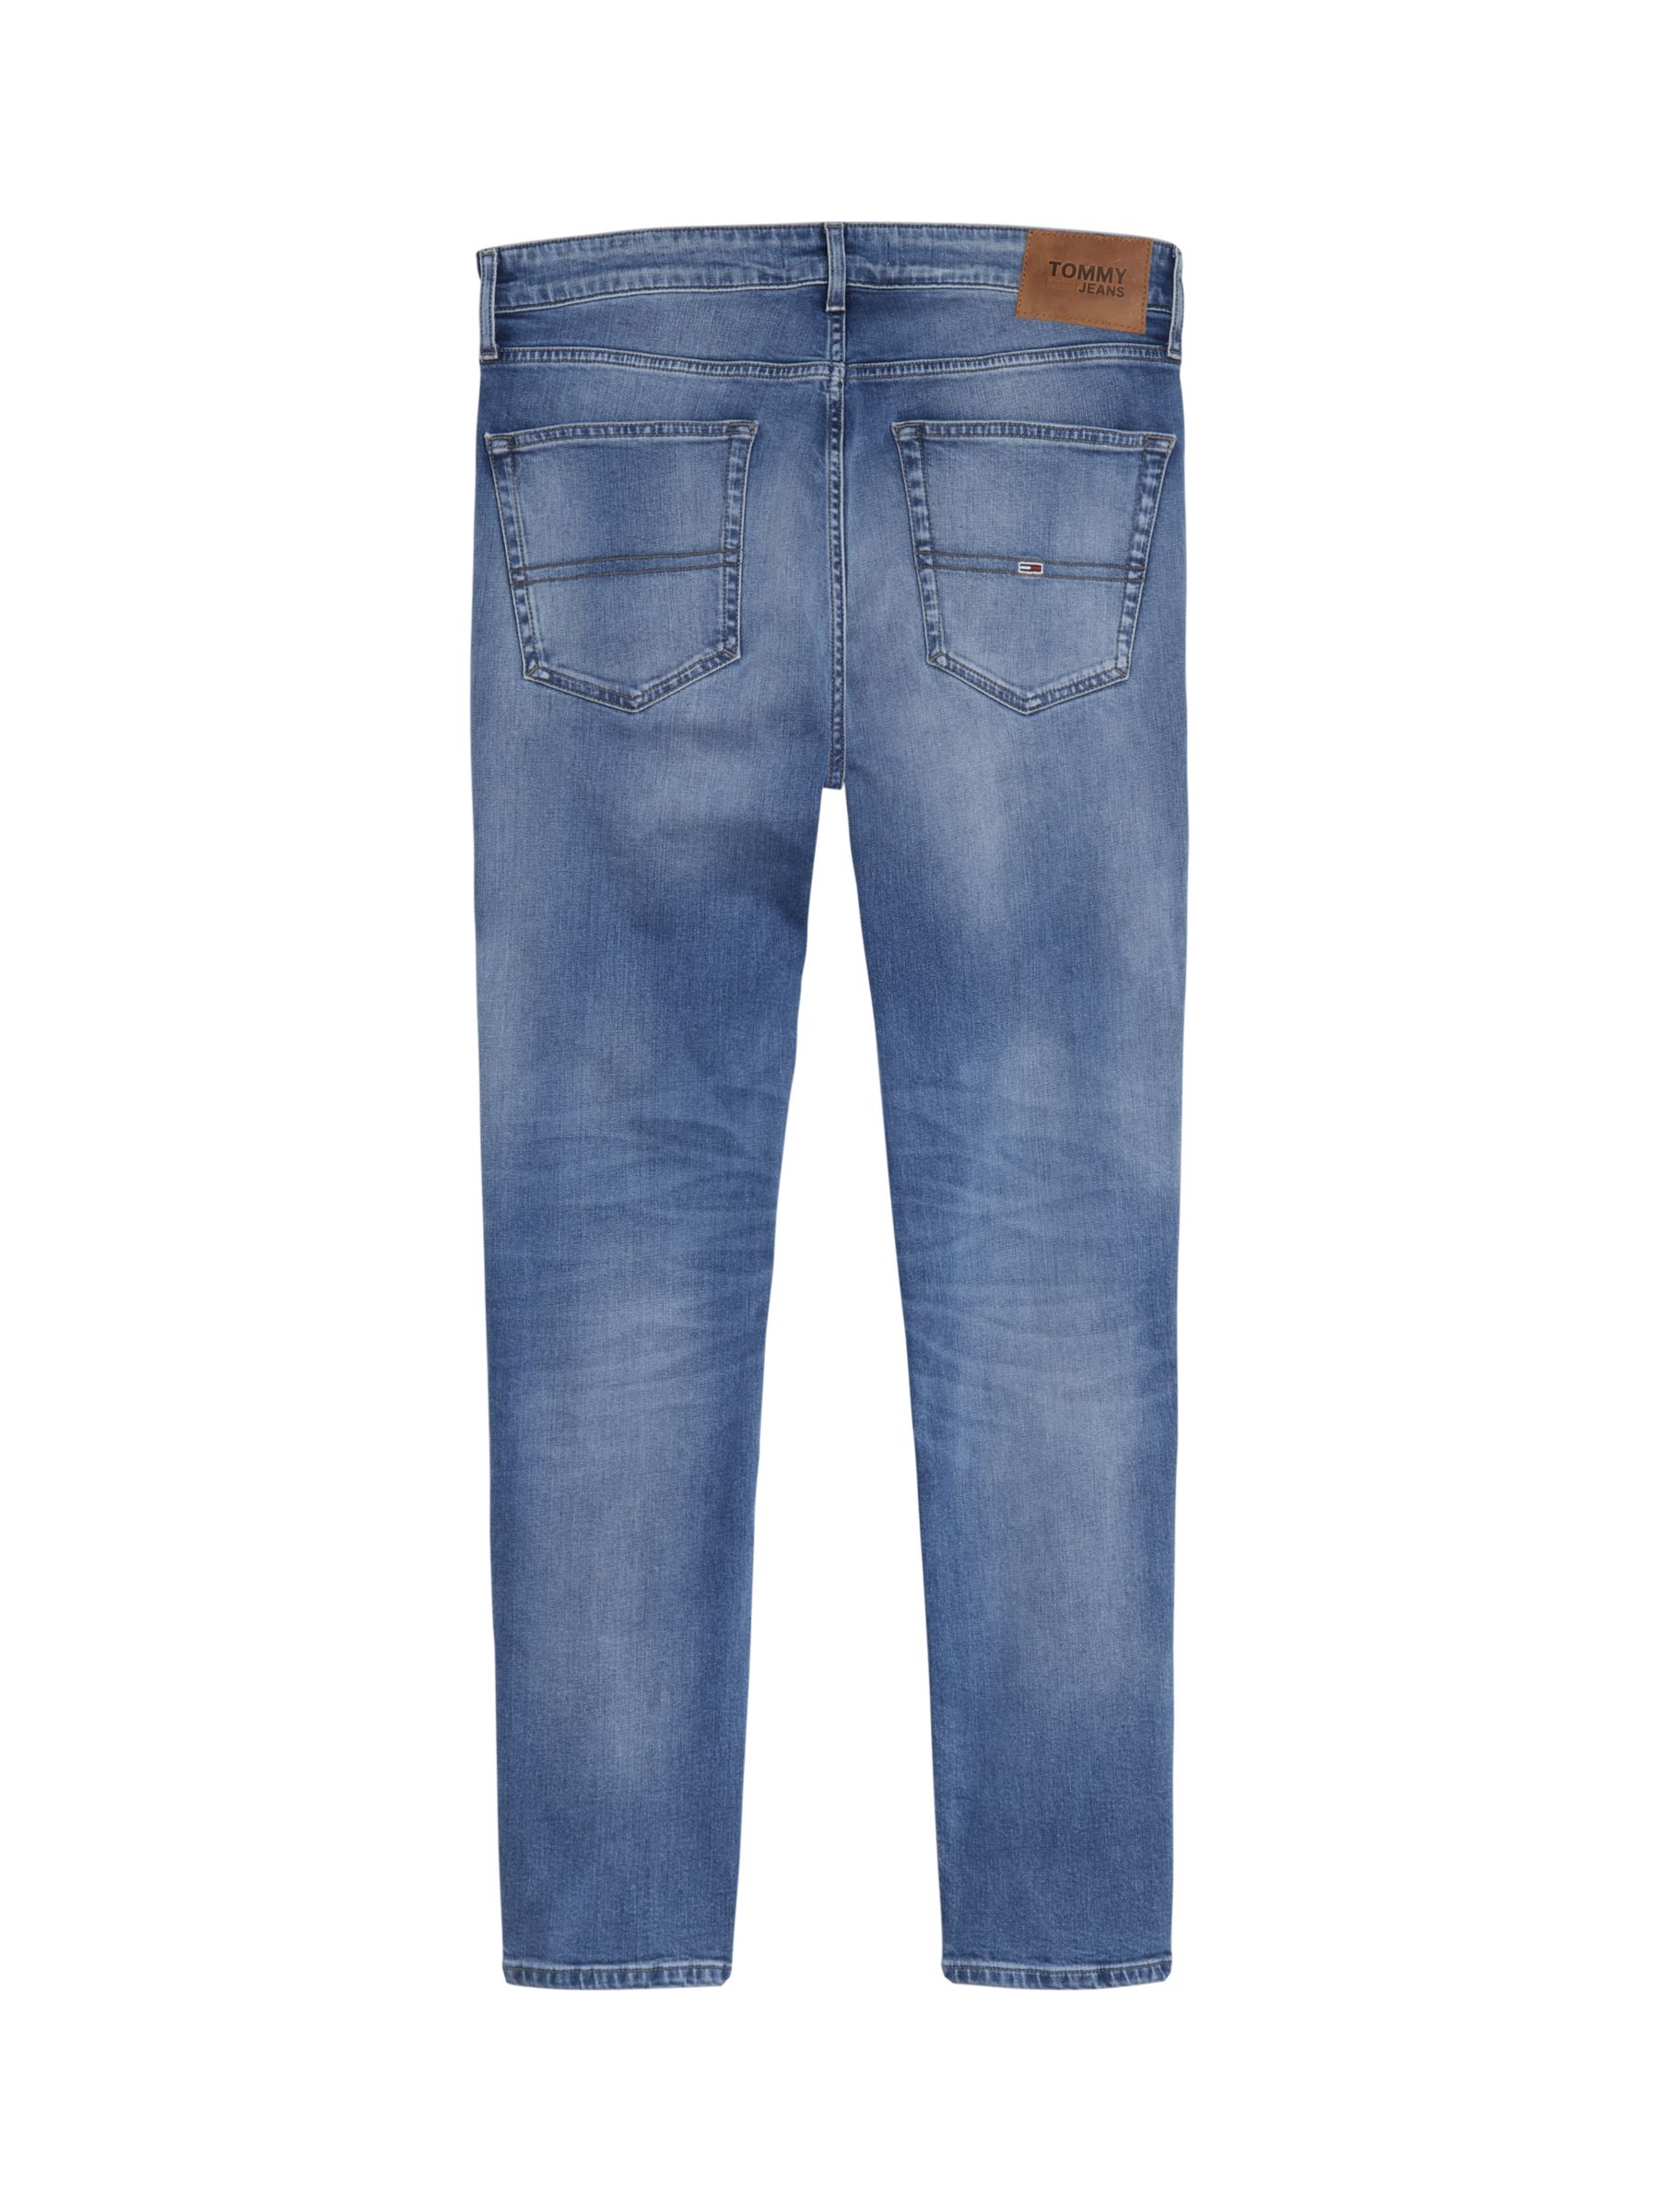 Buy Tommy Jeans Slim Fit Tapered Faded Jeans, Light Blue Stretch Online at johnlewis.com